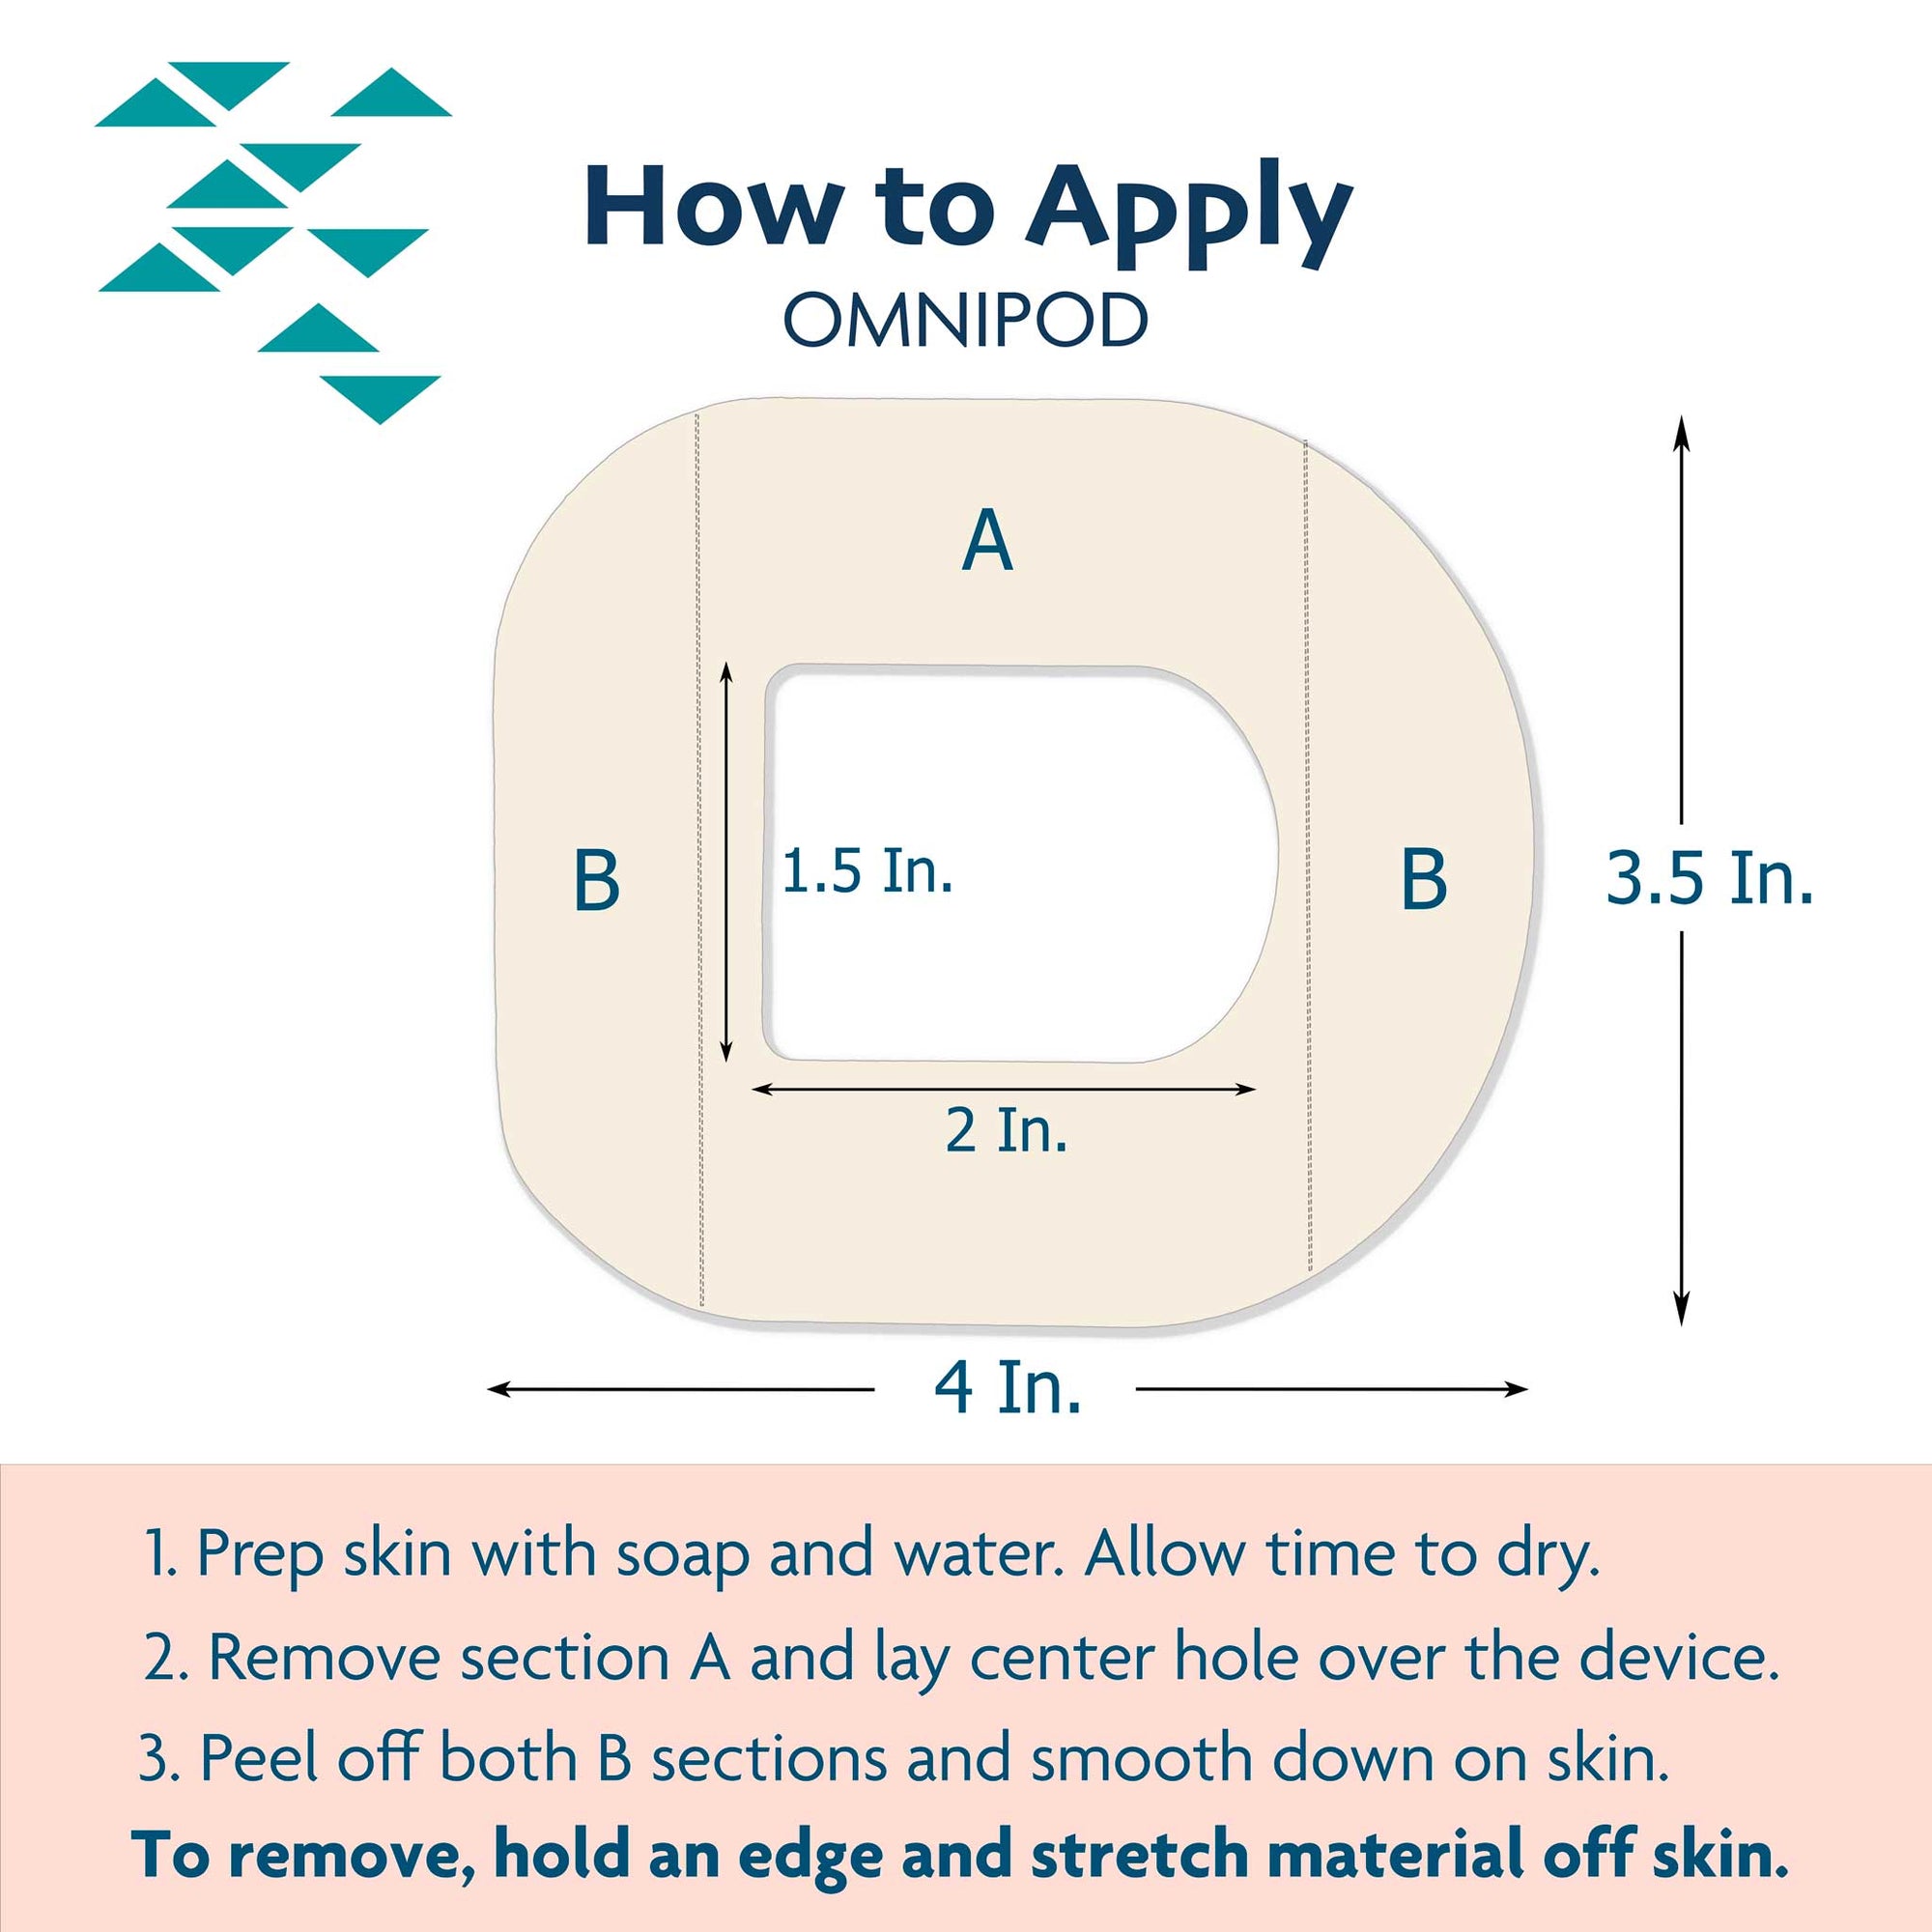 ExpressionMed Omnipod Overlay Adhesive Application Instructions